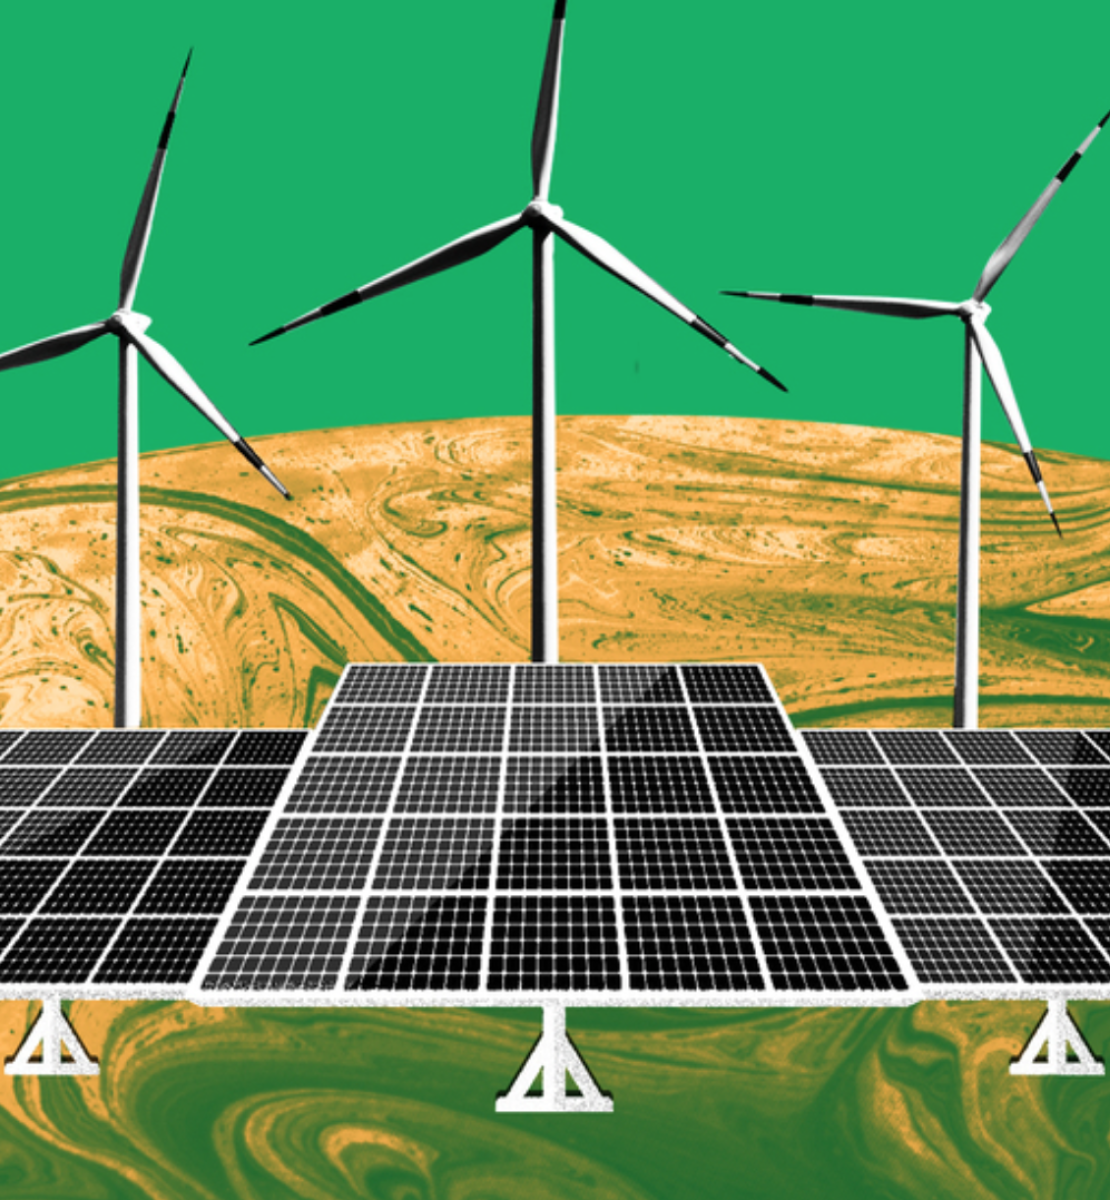 A graphic depicting alternative energy (solar panels and wind turbines).